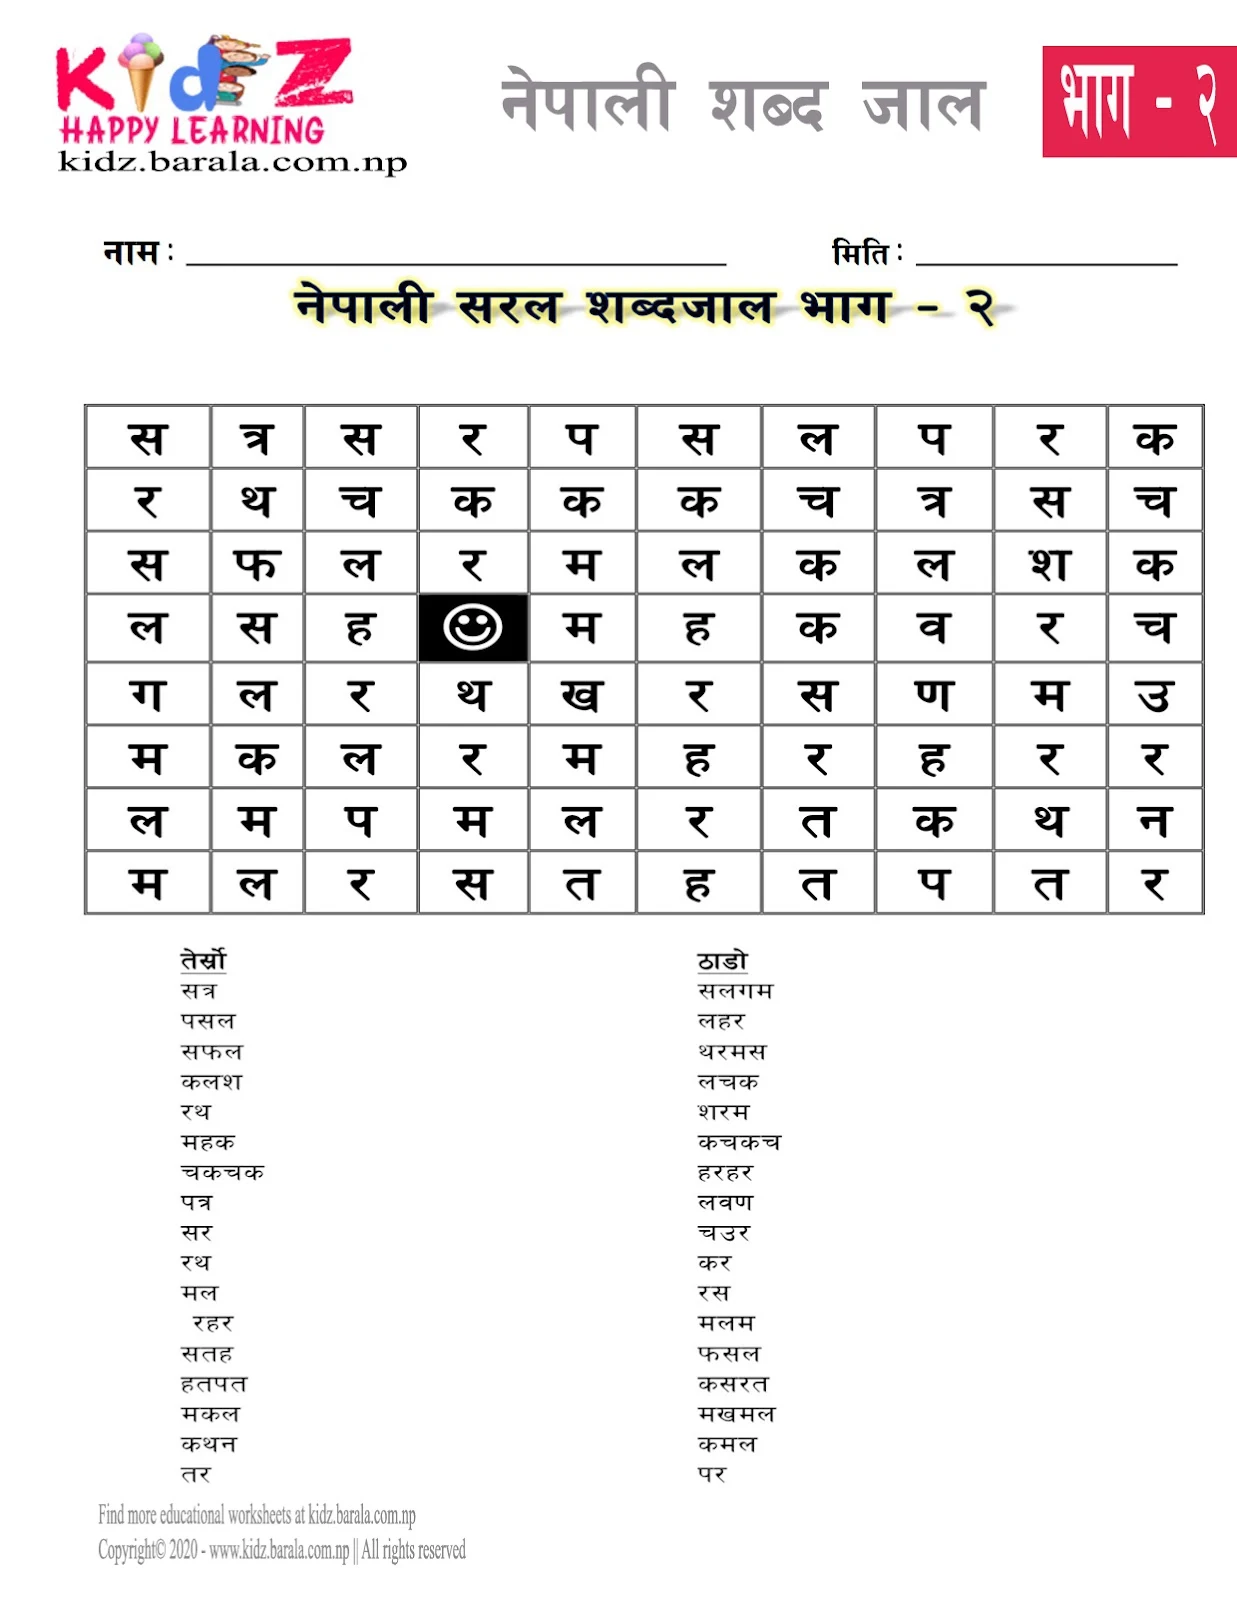 Simple Nepali words - Learn with fun - Puzzle -2